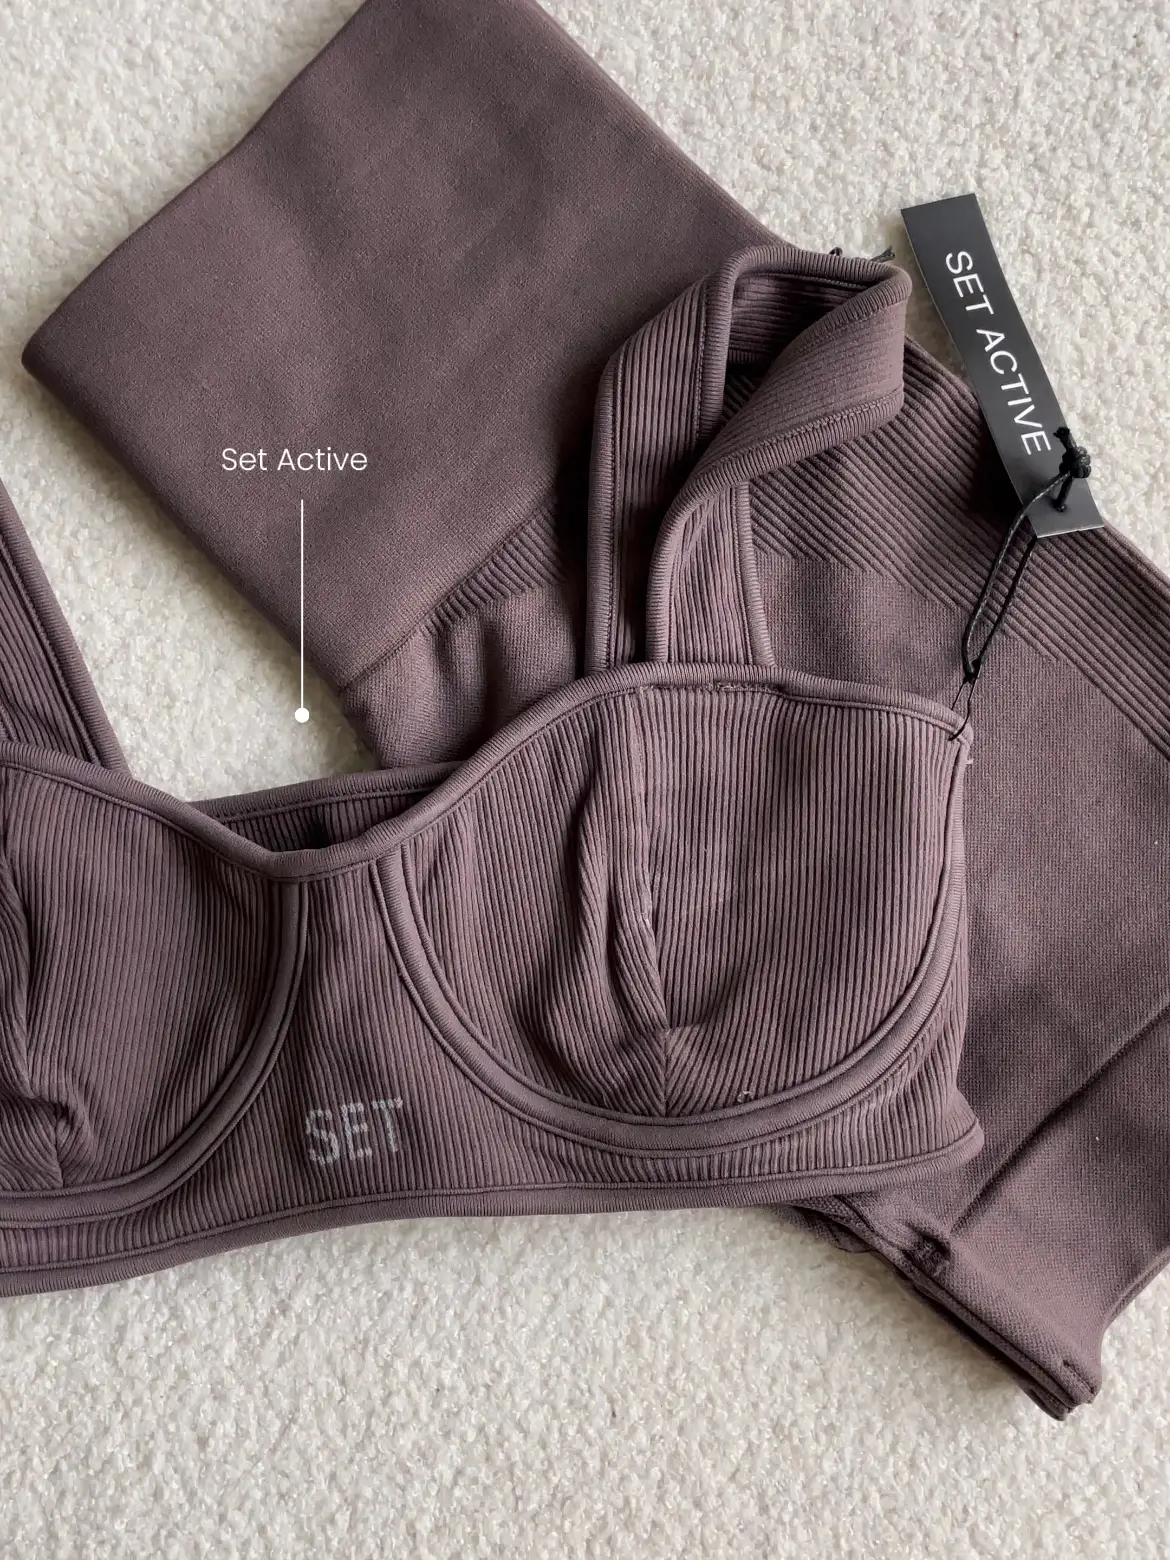 MY FAVORITE LULULEMON ACCESORIES, Gallery posted by Valeria Redher